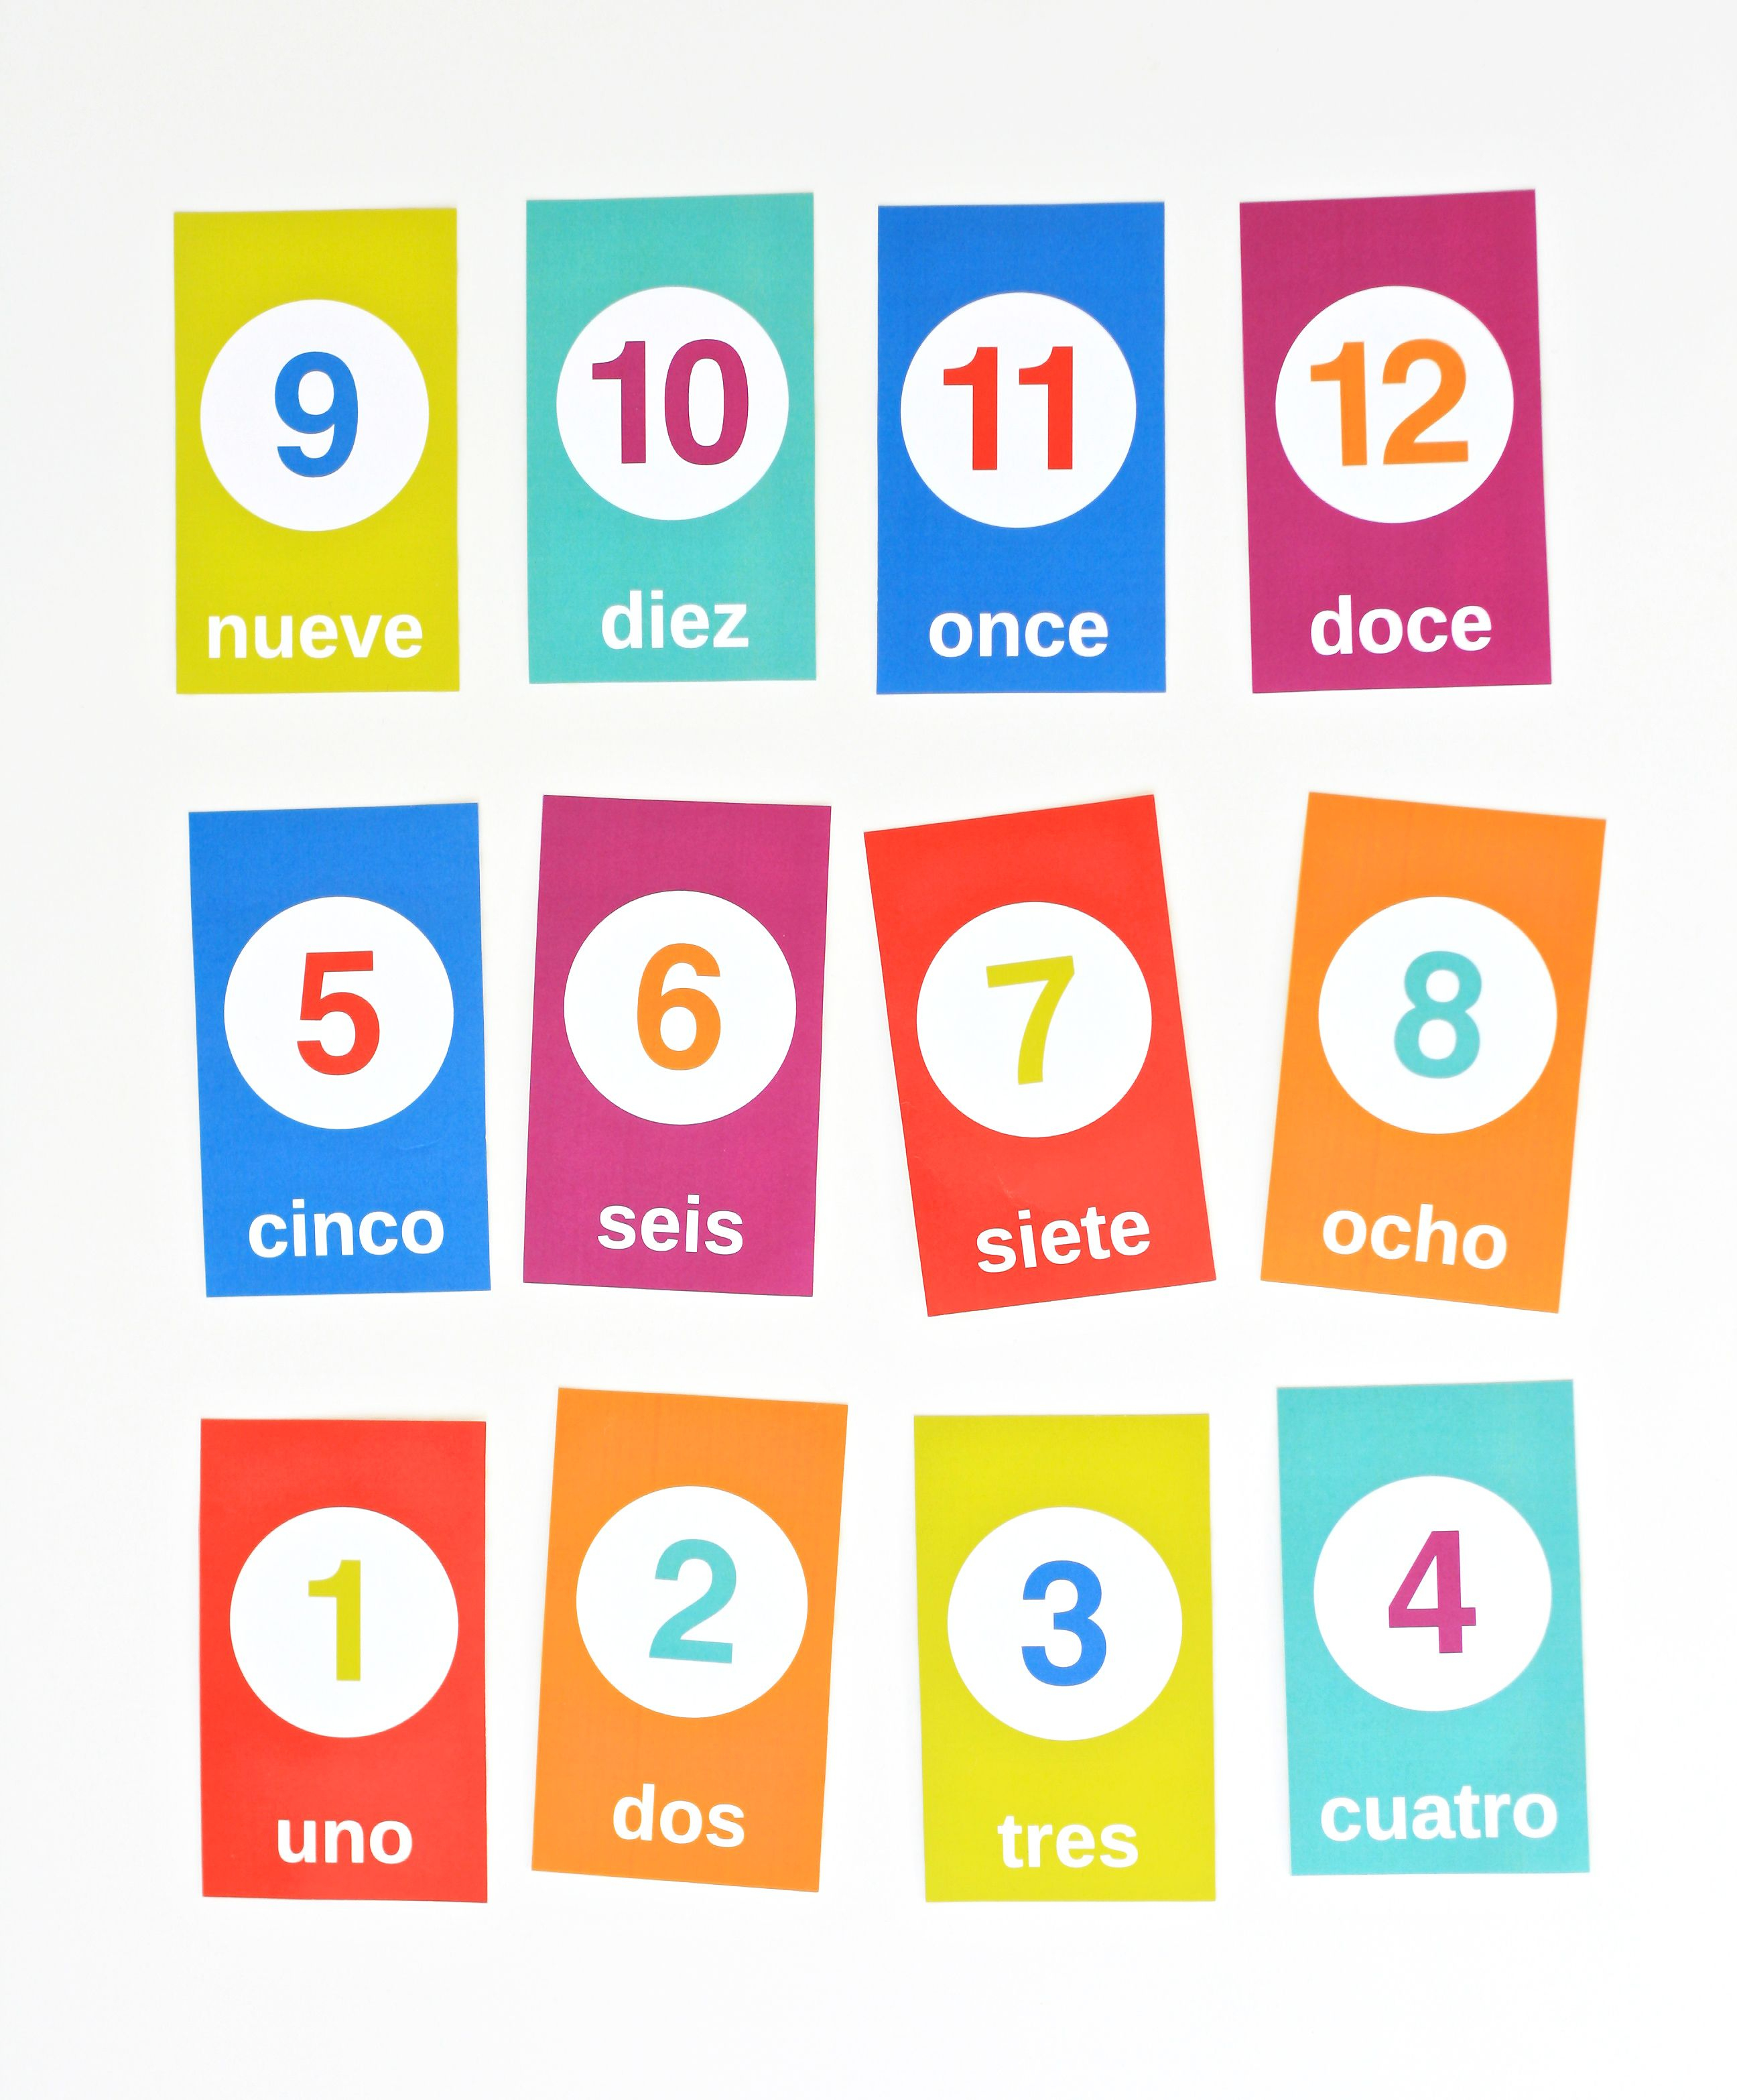 Free Flashcards For Counting In Spanish | Spanish Classroom - Free Printable Spanish Verb Flashcards